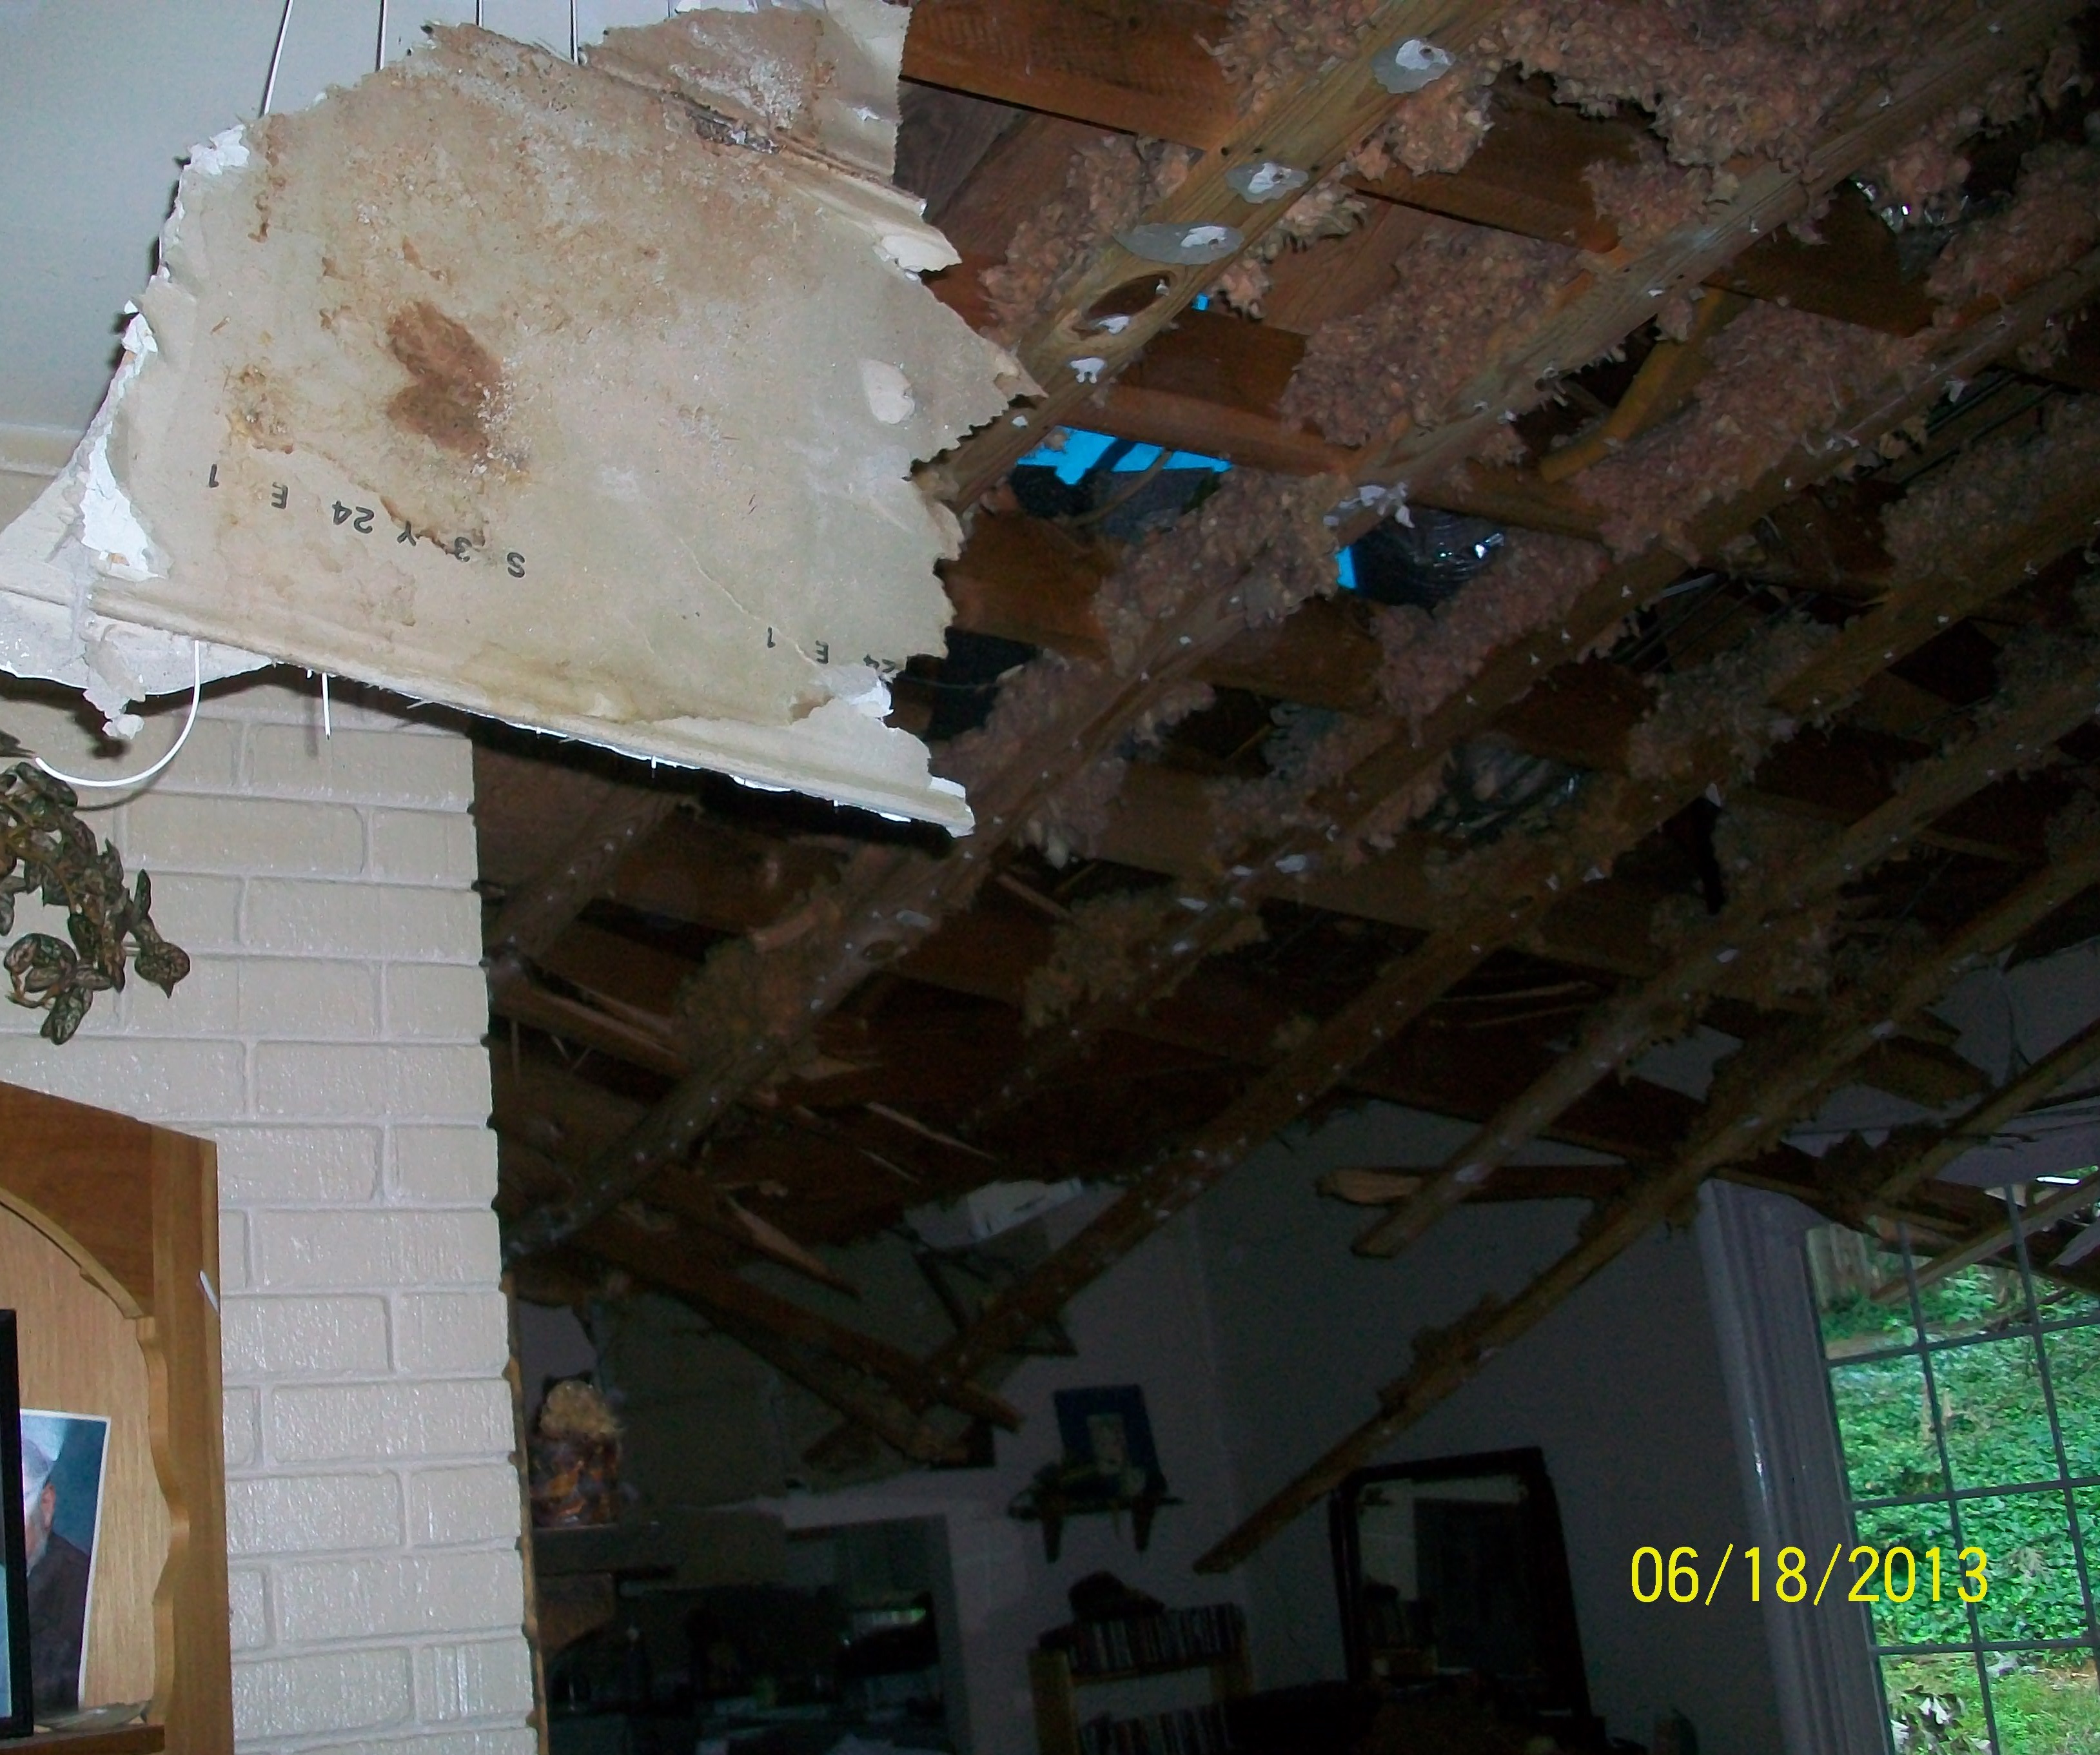 This room did NOT have an open cathedral ceiling prior to the storm